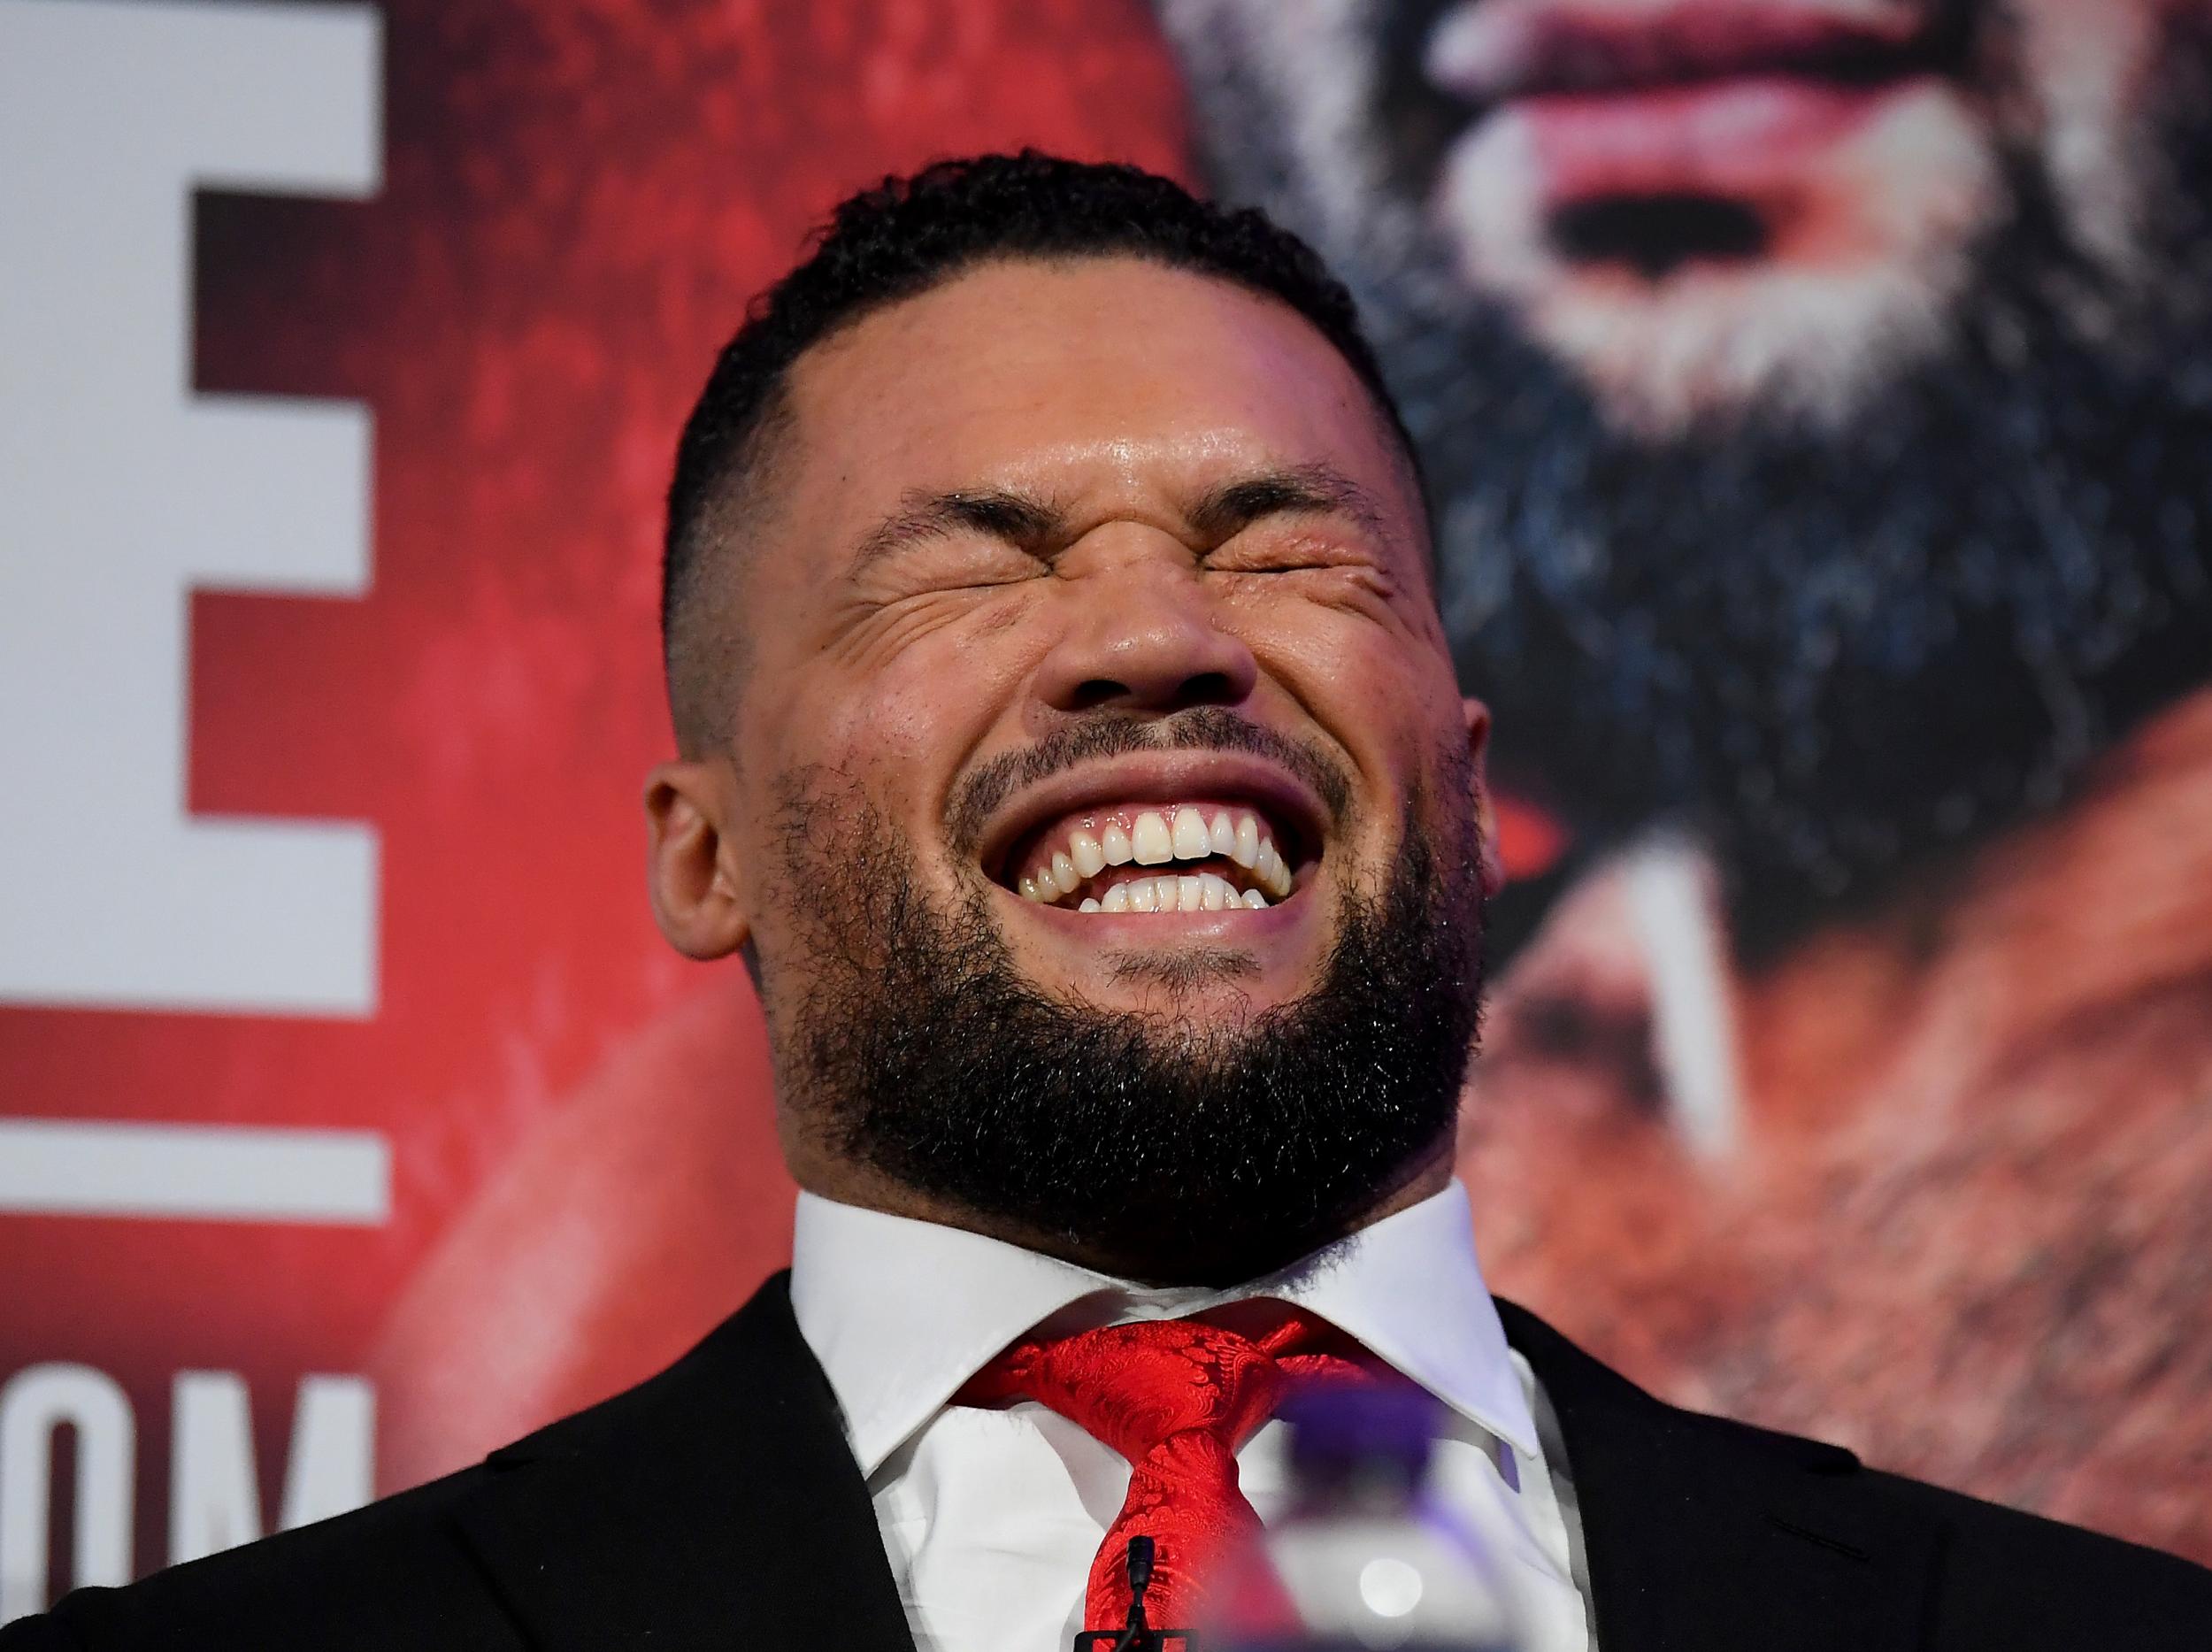 Joe Joyce lifts the lid on sparring sessions with Tyson Fury ahead of Deontay Wilder rematch